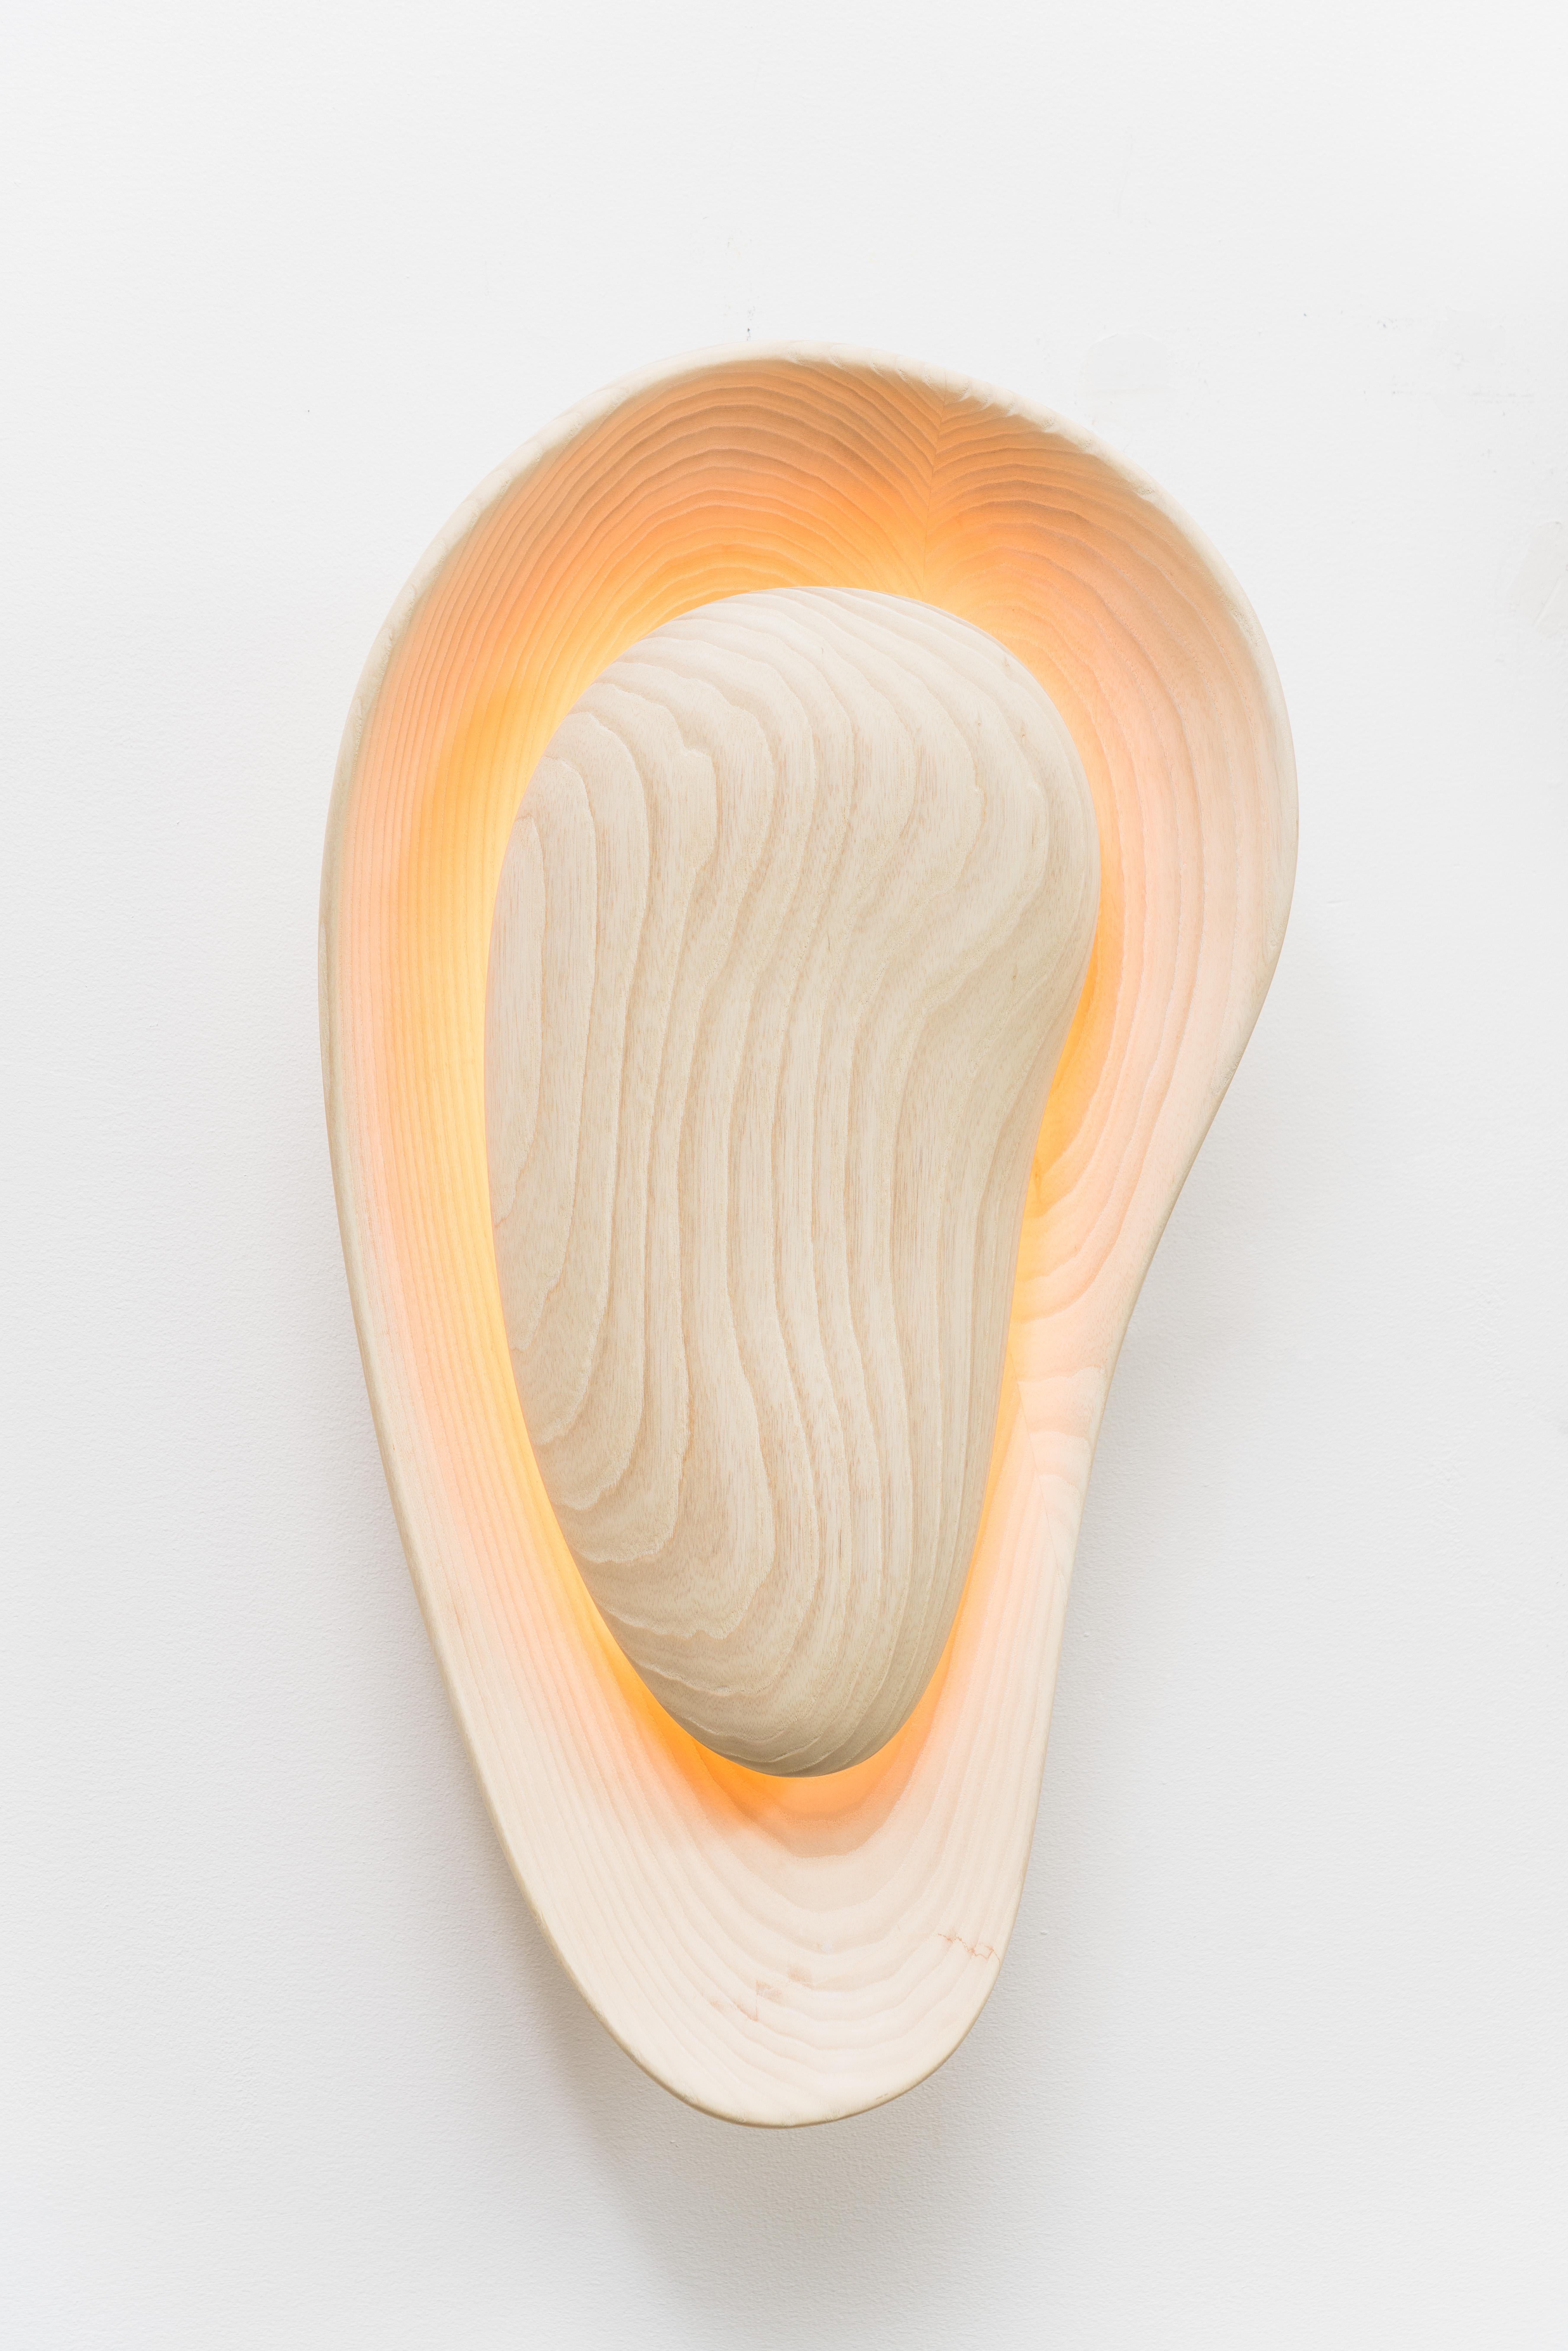 John Procario’s torqued, vessel-shaped Basin Series engages the viewer both physically and psychologically by synthesizing conceptual art, minimalism, and contemporary design. The hand carved vessels levitate weightlessly on the wall, in harmony